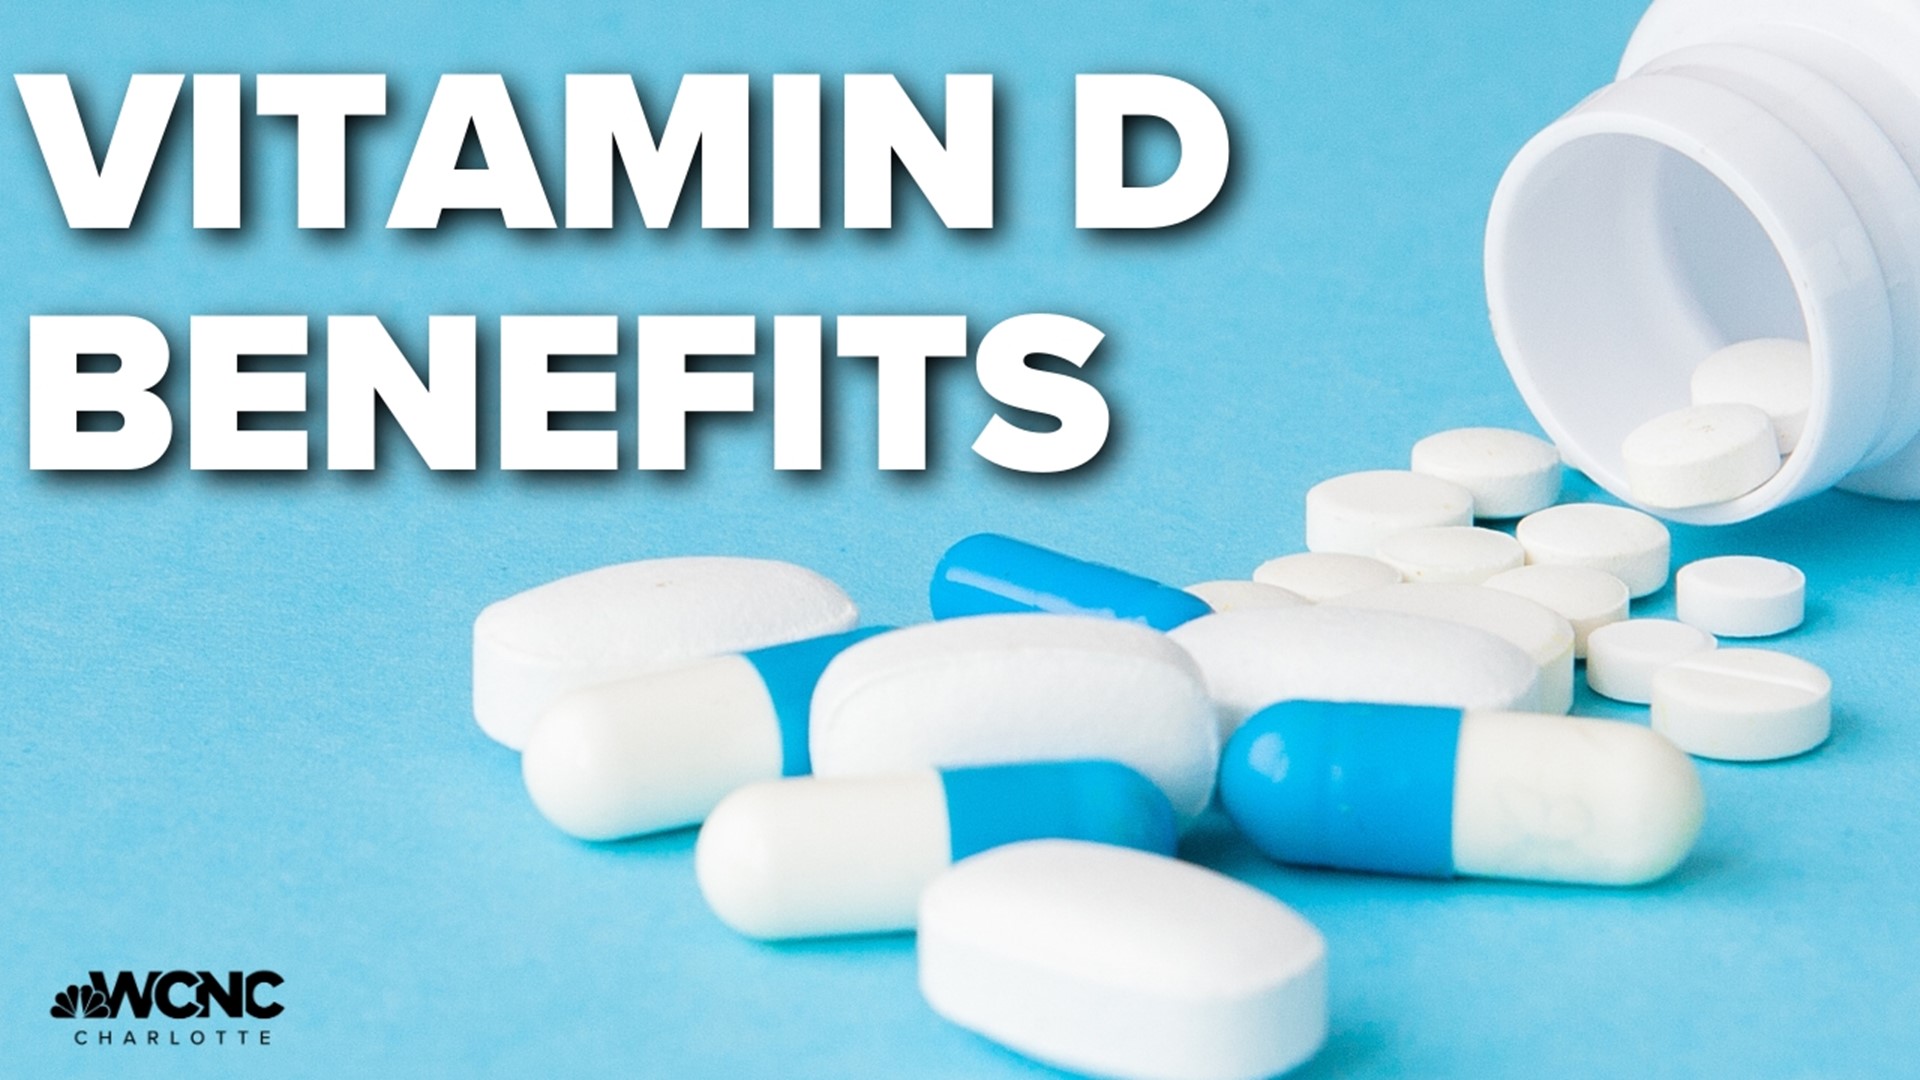 A lot of folks aren't getting enough Vitamin D. Research shows it plays a role in fighting disease.